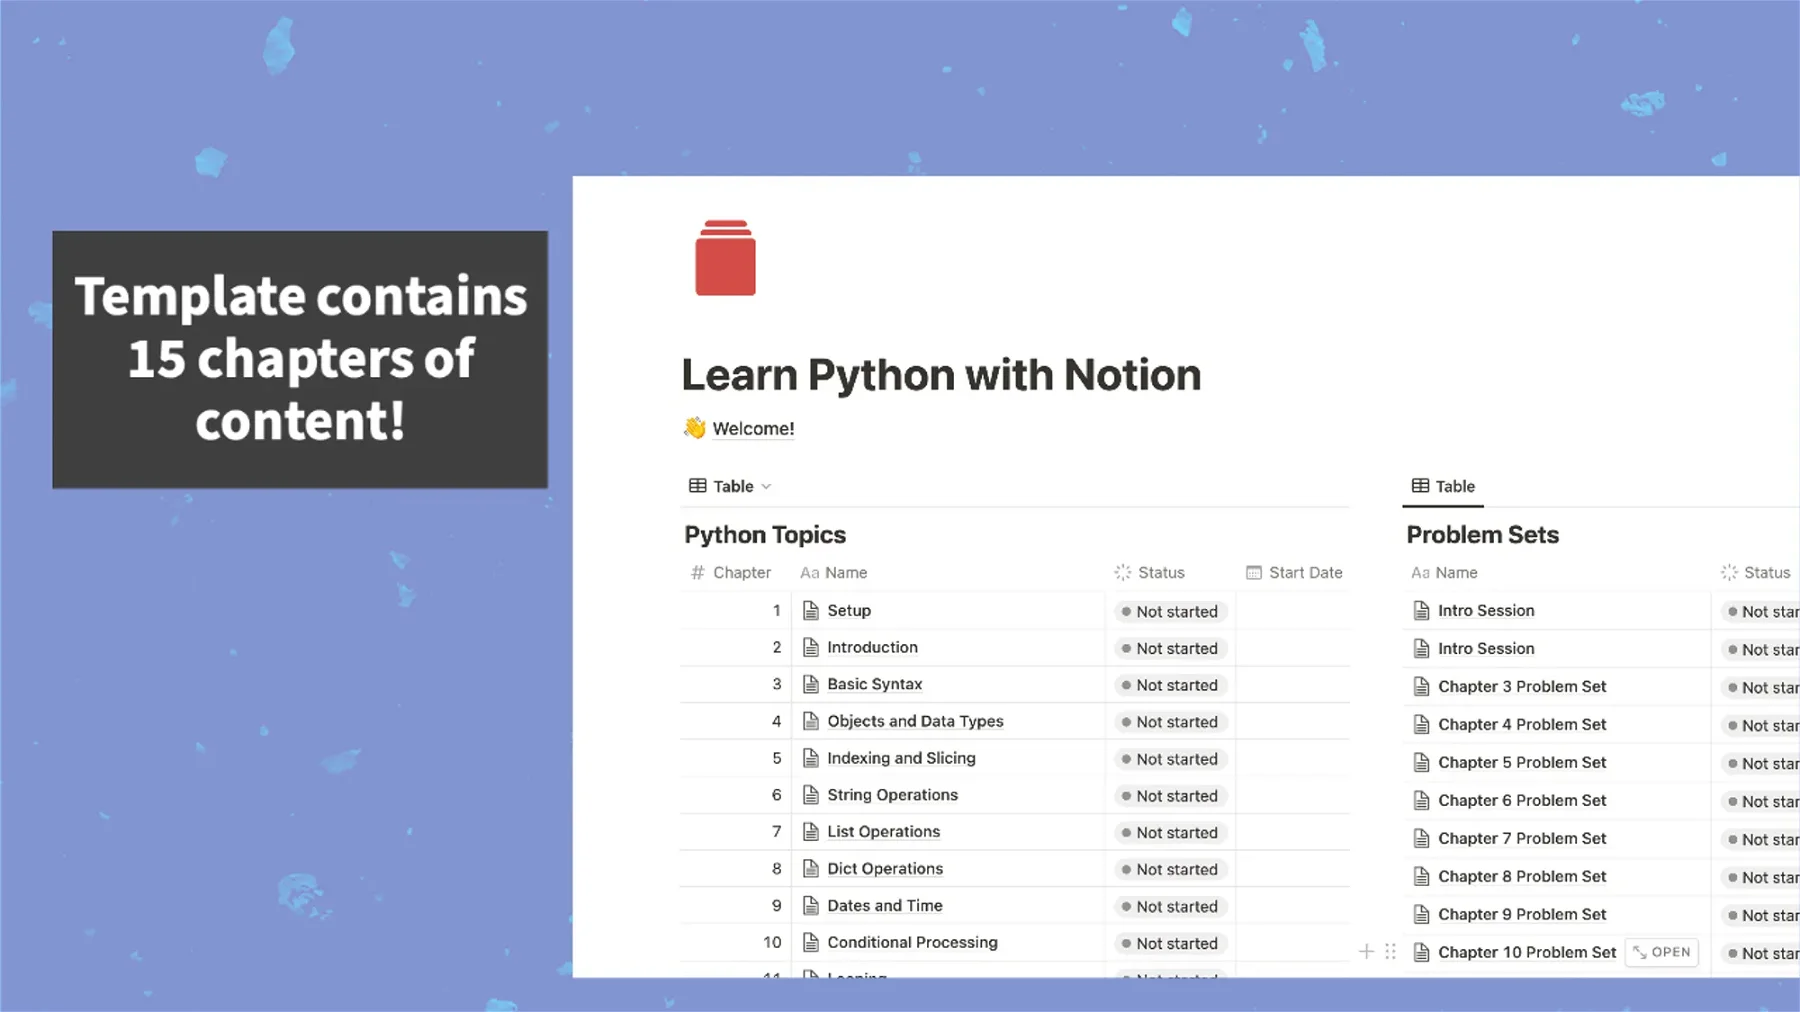 Learn Python with Notion